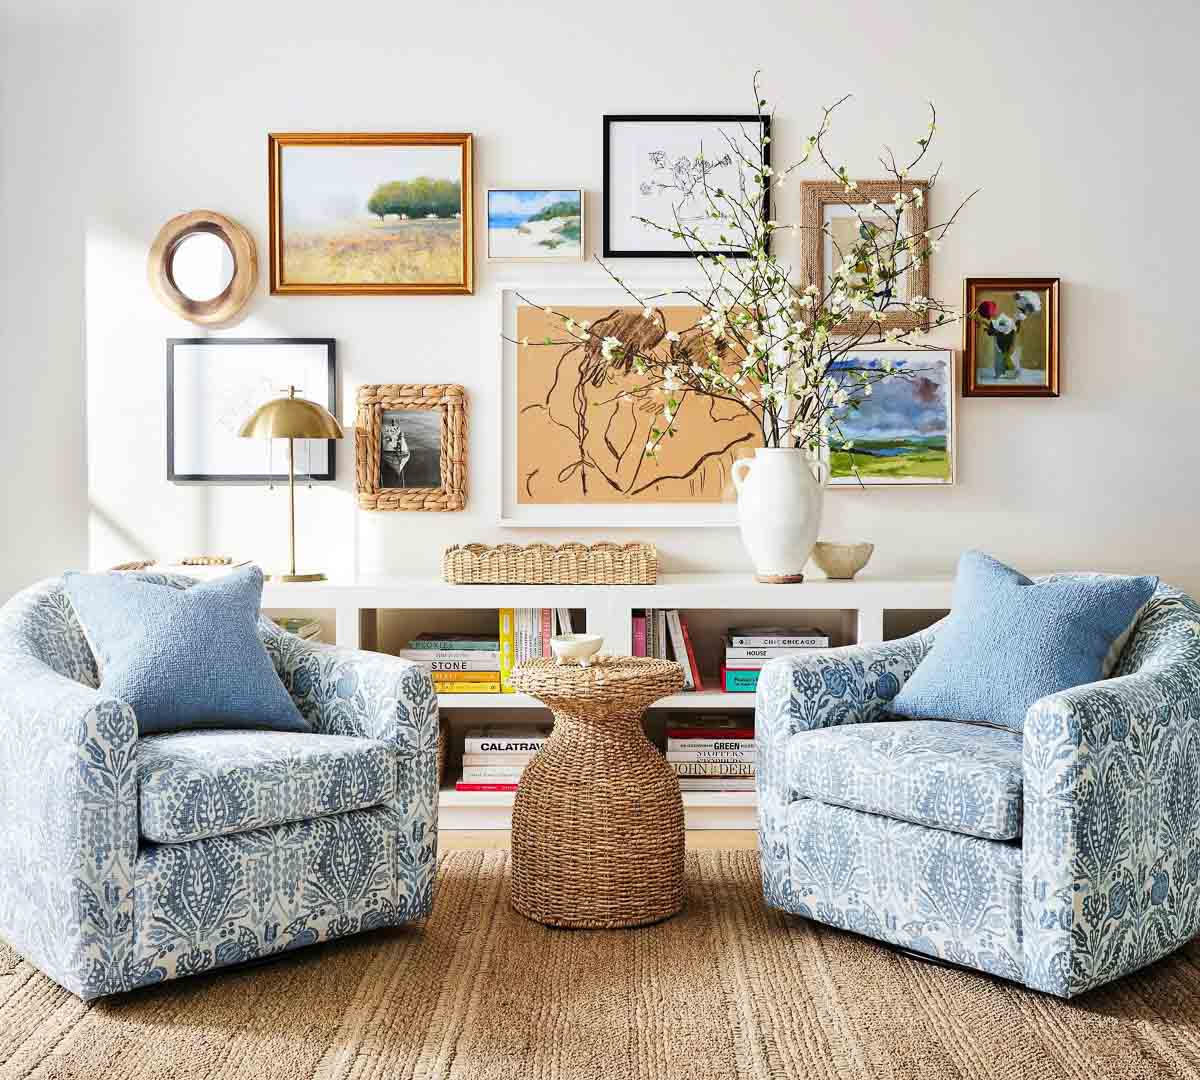 Gallery wall layout over a living room console